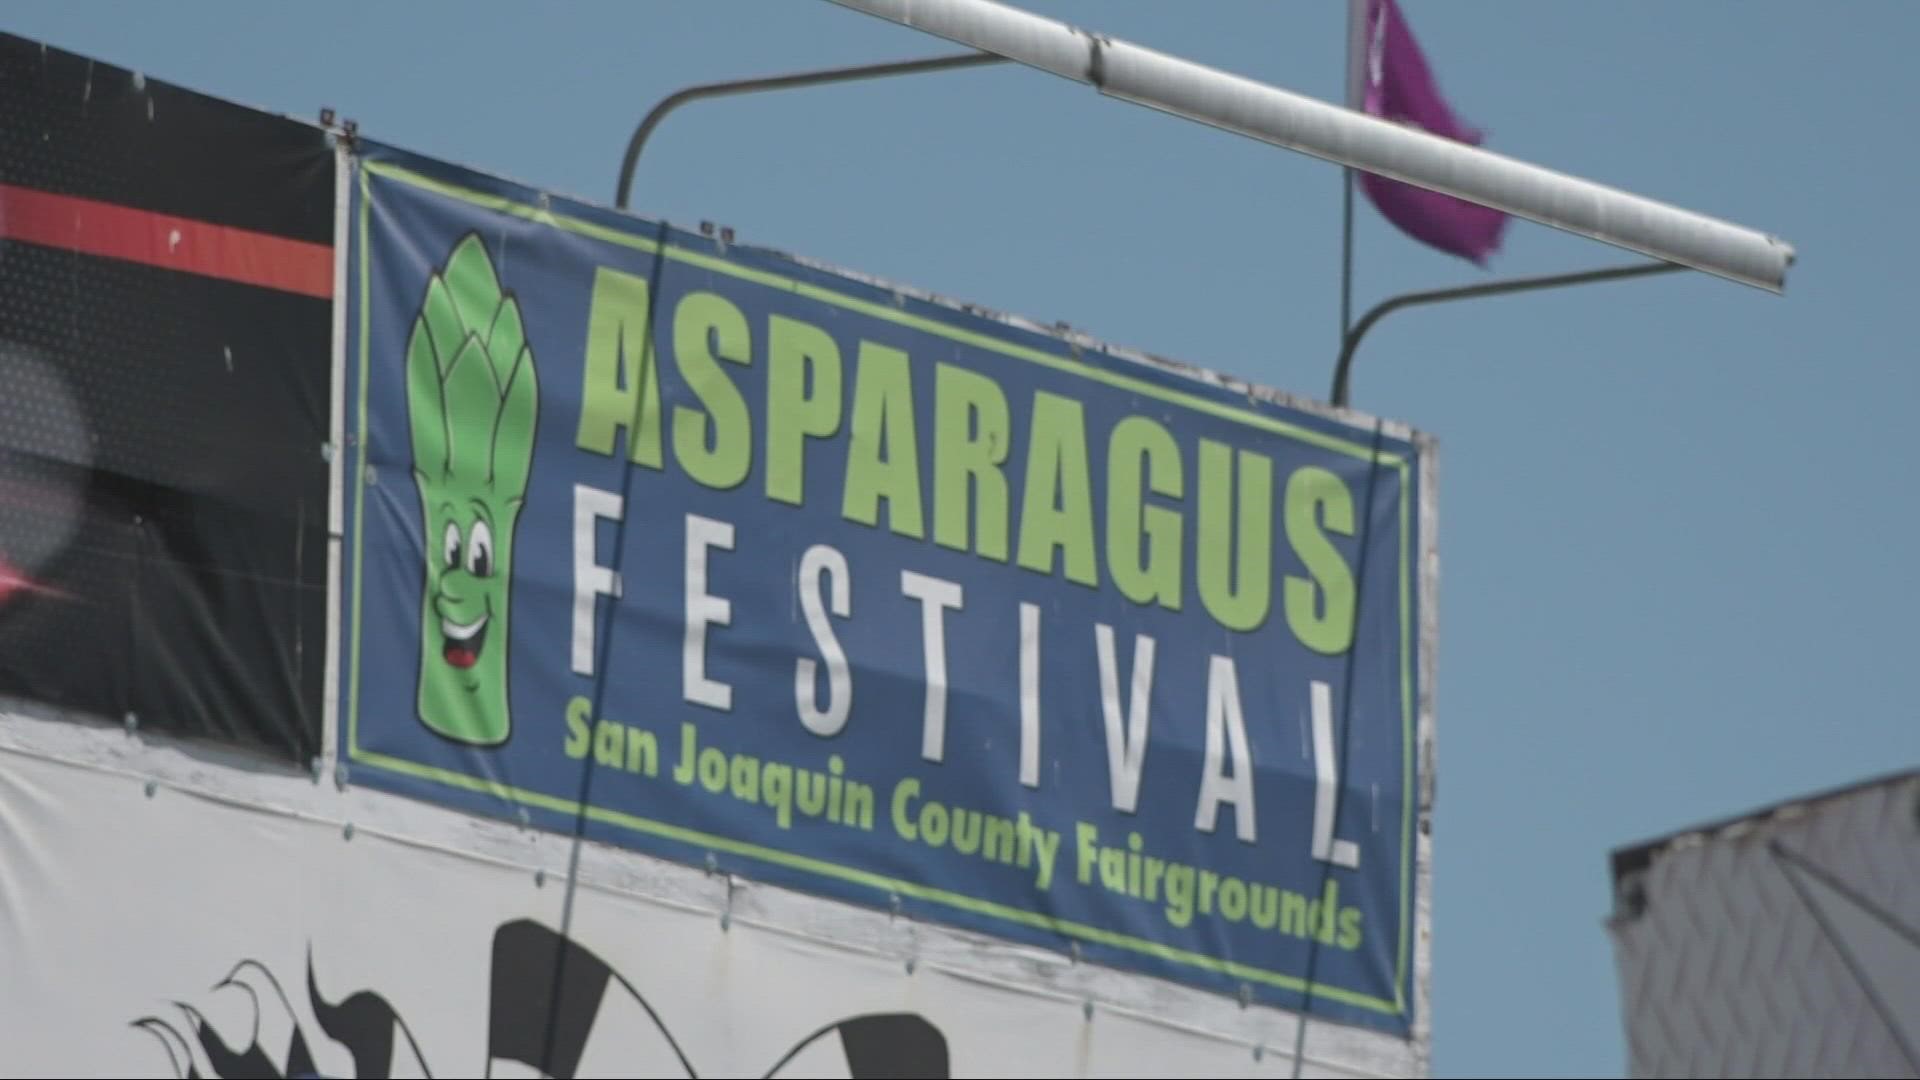 The San Joaquin County Asparagus Festival is back, returning to the San Joaquin County Fairgrounds for the first time since 2019.